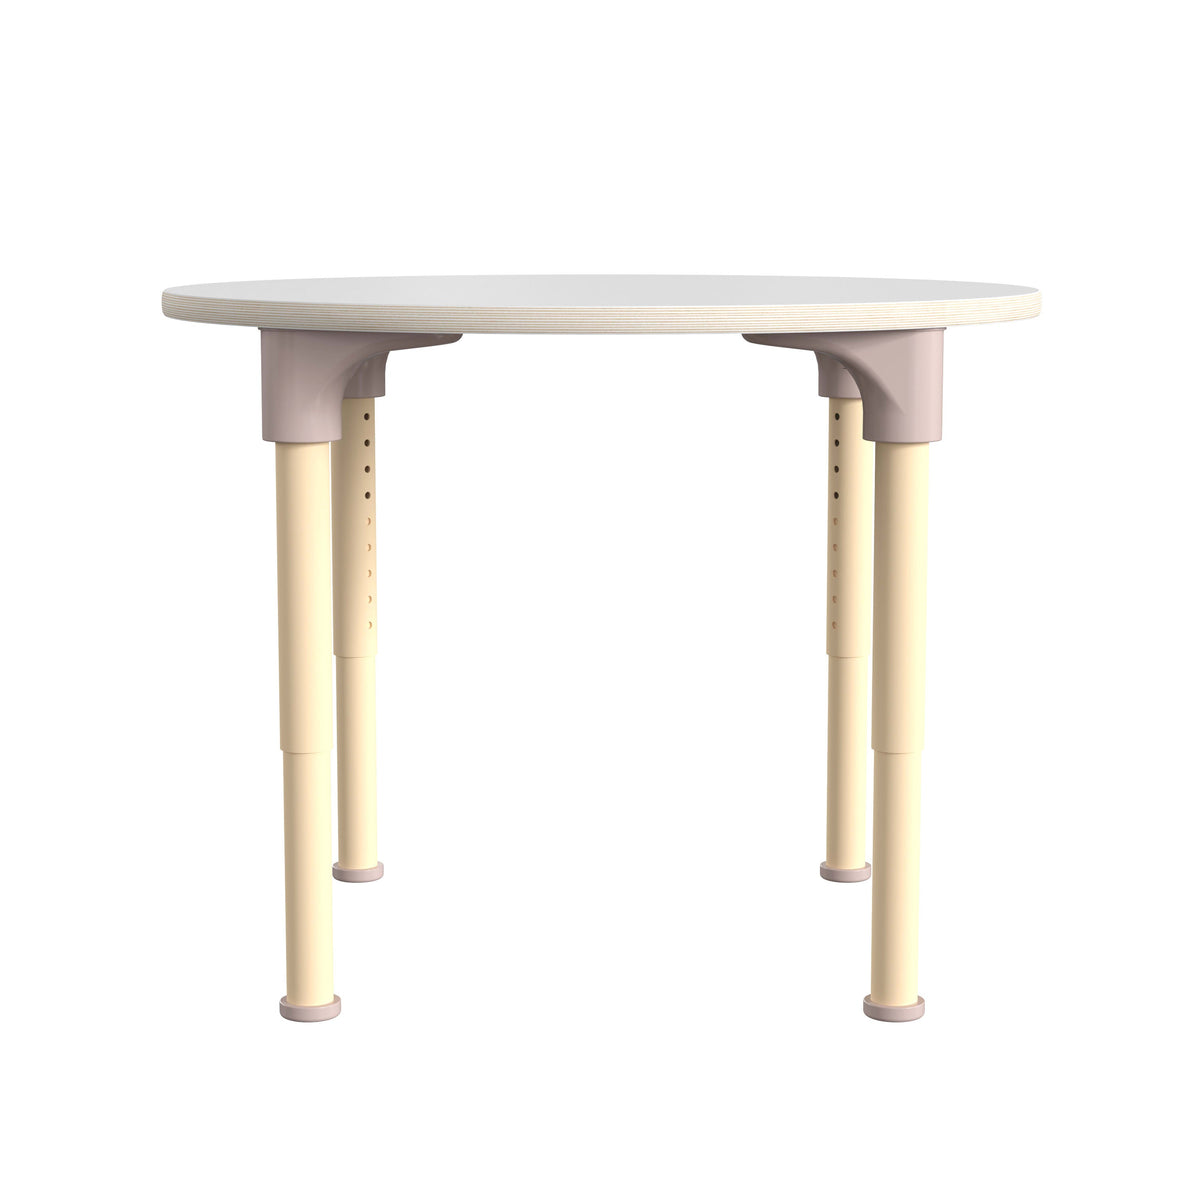 Commercial Grade Adjustable Height Round Wooden Classroom Table - Beech/White